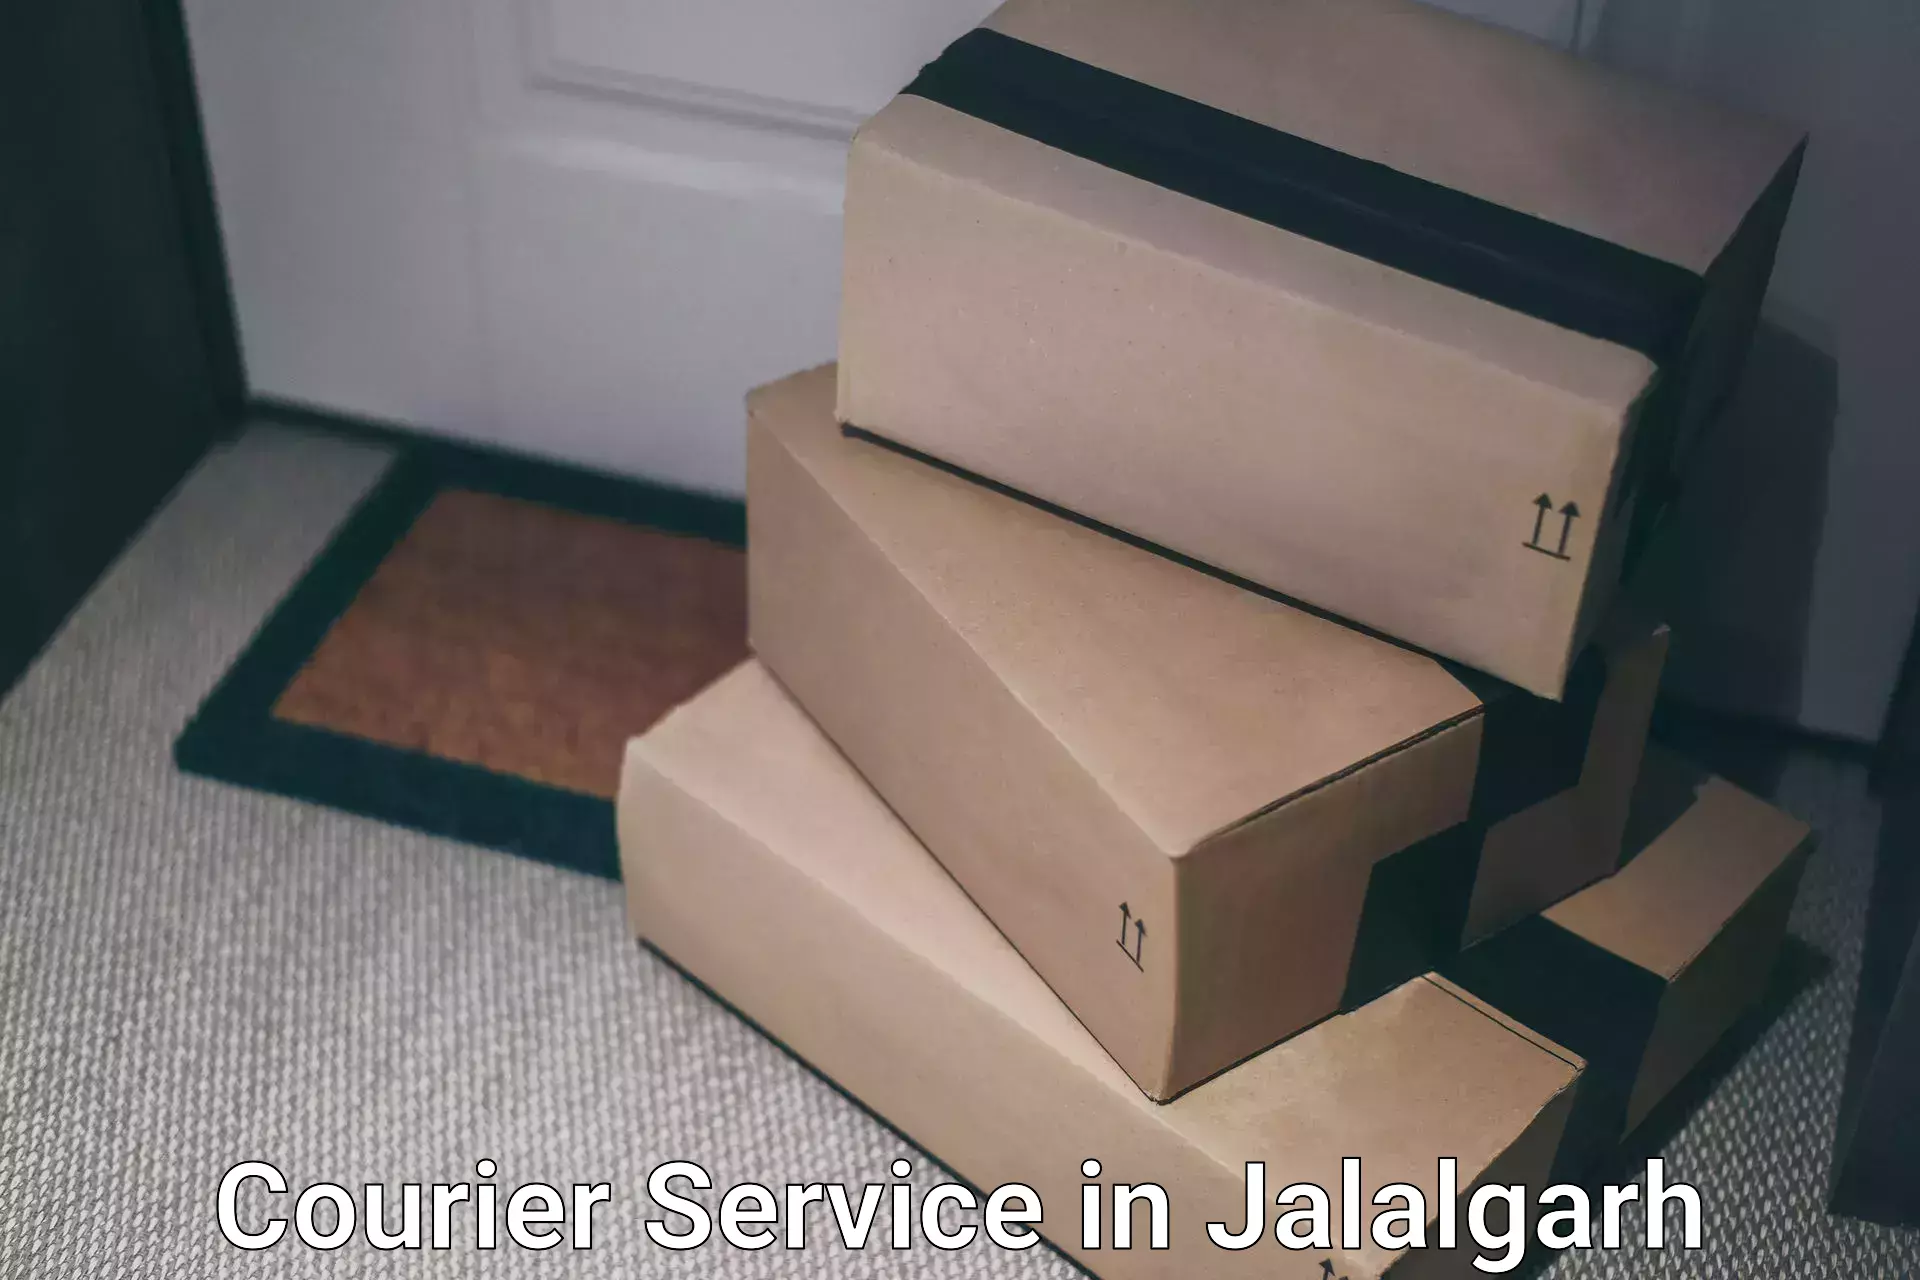 Dynamic courier operations in Jalalgarh